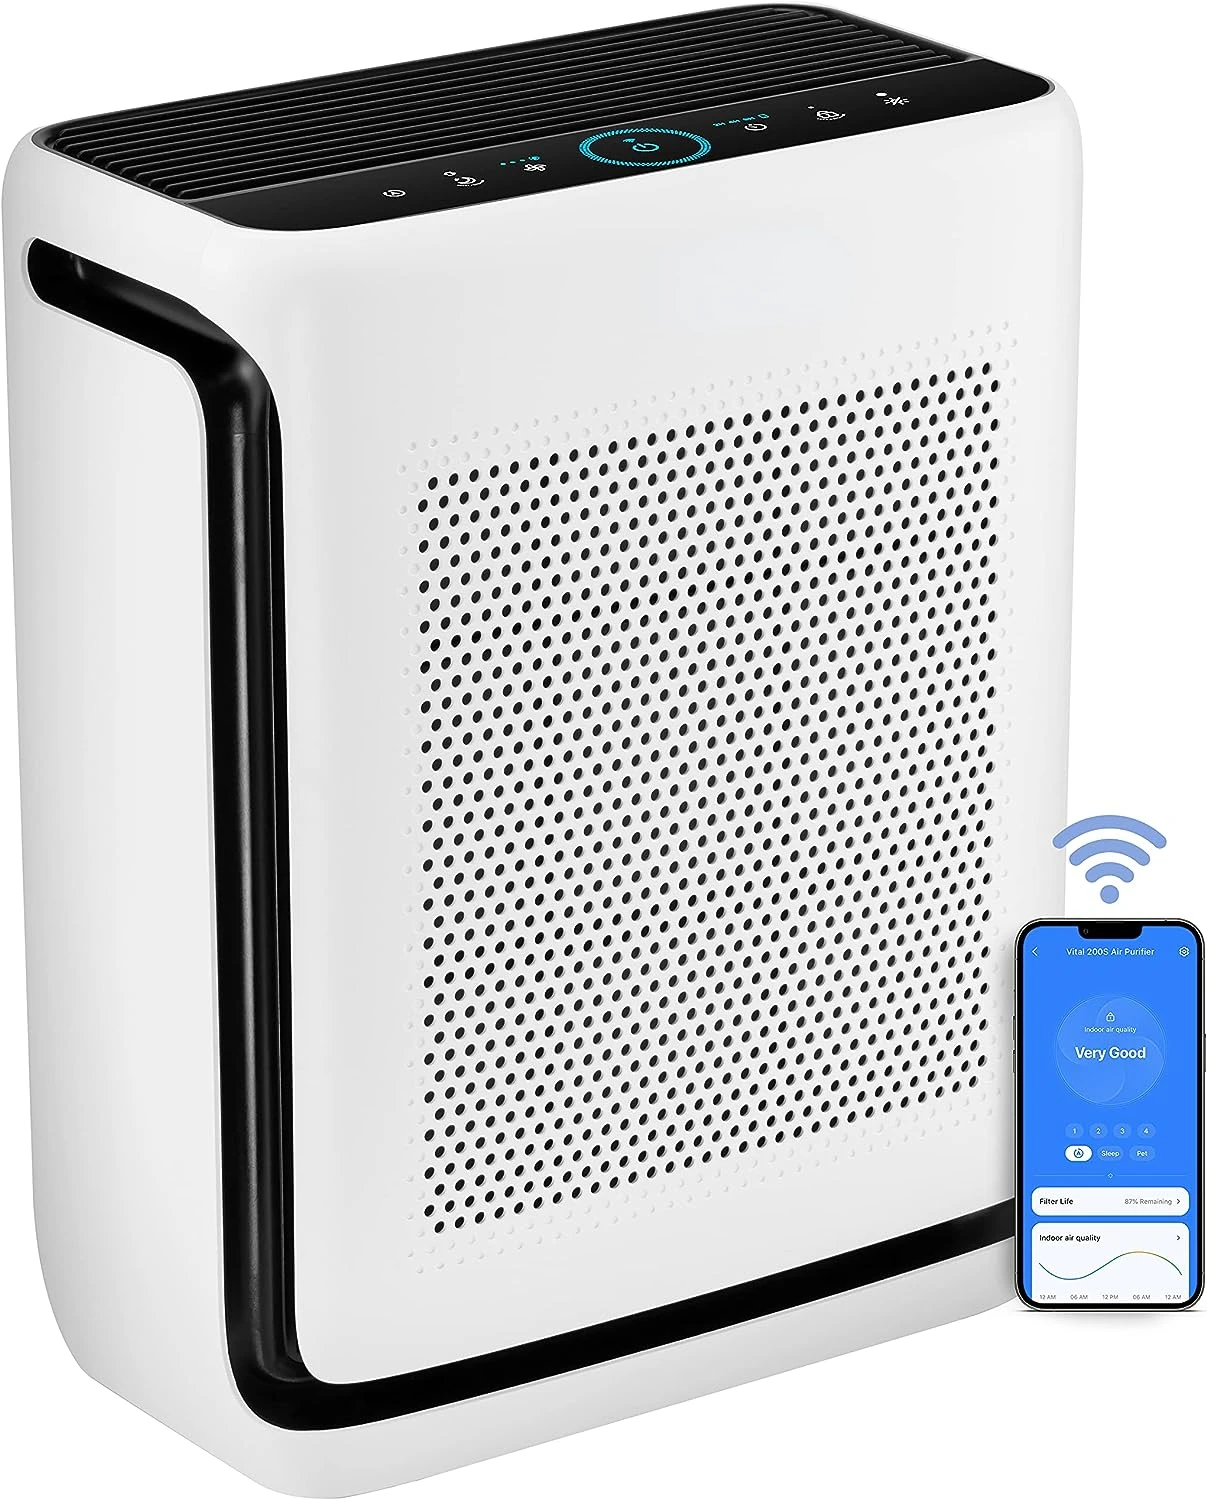 

Air Purifiers for Home Large Room Up to 1900 Ft² in 1 Hr with Washable Filters, Air Quality Monitor, Smart WiFi, HEPA Filter Ca